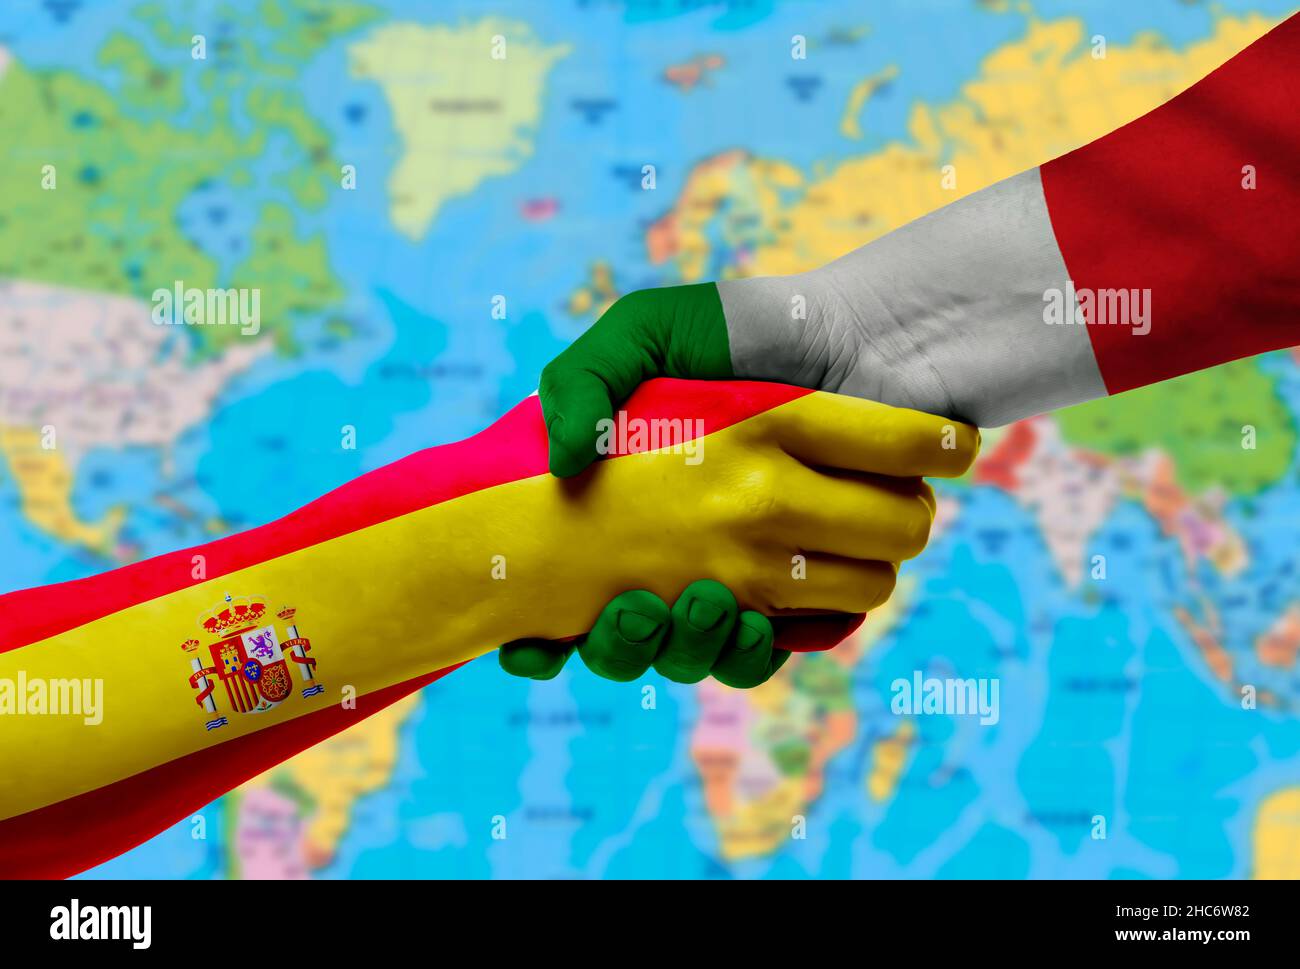 Handshake between Italy and Spain flags painted on hands.With background of world map Stock Photo